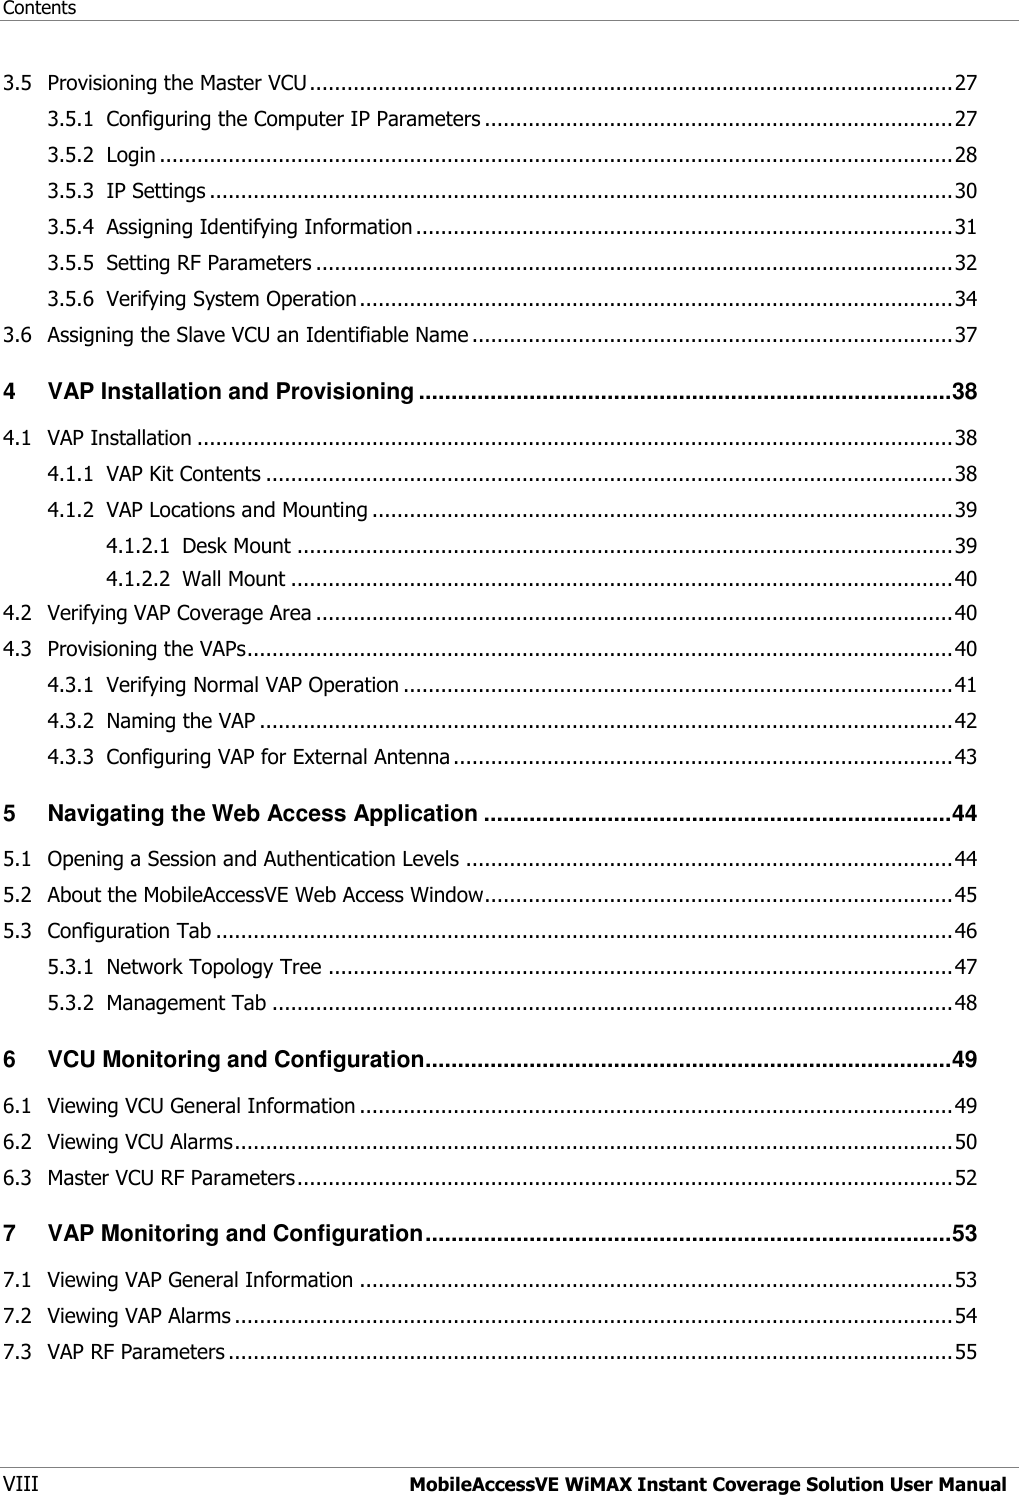 Contents VIII  MobileAccessVE WiMAX Instant Coverage Solution User Manual 3.5 Provisioning the Master VCU ....................................................................................................... 27 3.5.1 Configuring the Computer IP Parameters ........................................................................... 27 3.5.2 Login ............................................................................................................................... 28 3.5.3 IP Settings ....................................................................................................................... 30 3.5.4 Assigning Identifying Information ...................................................................................... 31 3.5.5 Setting RF Parameters ...................................................................................................... 32 3.5.6 Verifying System Operation ............................................................................................... 34 3.6 Assigning the Slave VCU an Identifiable Name ............................................................................. 37 4 VAP Installation and Provisioning .................................................................................. 38 4.1 VAP Installation ......................................................................................................................... 38 4.1.1 VAP Kit Contents .............................................................................................................. 38 4.1.2 VAP Locations and Mounting ............................................................................................. 39 4.1.2.1 Desk Mount ......................................................................................................... 39 4.1.2.2 Wall Mount .......................................................................................................... 40 4.2 Verifying VAP Coverage Area ...................................................................................................... 40 4.3 Provisioning the VAPs ................................................................................................................. 40 4.3.1 Verifying Normal VAP Operation ........................................................................................ 41 4.3.2 Naming the VAP ............................................................................................................... 42 4.3.3 Configuring VAP for External Antenna ................................................................................ 43 5 Navigating the Web Access Application ........................................................................ 44 5.1 Opening a Session and Authentication Levels .............................................................................. 44 5.2 About the MobileAccessVE Web Access Window........................................................................... 45 5.3 Configuration Tab ...................................................................................................................... 46 5.3.1 Network Topology Tree .................................................................................................... 47 5.3.2 Management Tab ............................................................................................................. 48 6 VCU Monitoring and Configuration ................................................................................. 49 6.1 Viewing VCU General Information ............................................................................................... 49 6.2 Viewing VCU Alarms ................................................................................................................... 50 6.3 Master VCU RF Parameters ......................................................................................................... 52 7 VAP Monitoring and Configuration ................................................................................. 53 7.1 Viewing VAP General Information ............................................................................................... 53 7.2 Viewing VAP Alarms ................................................................................................................... 54 7.3 VAP RF Parameters .................................................................................................................... 55 